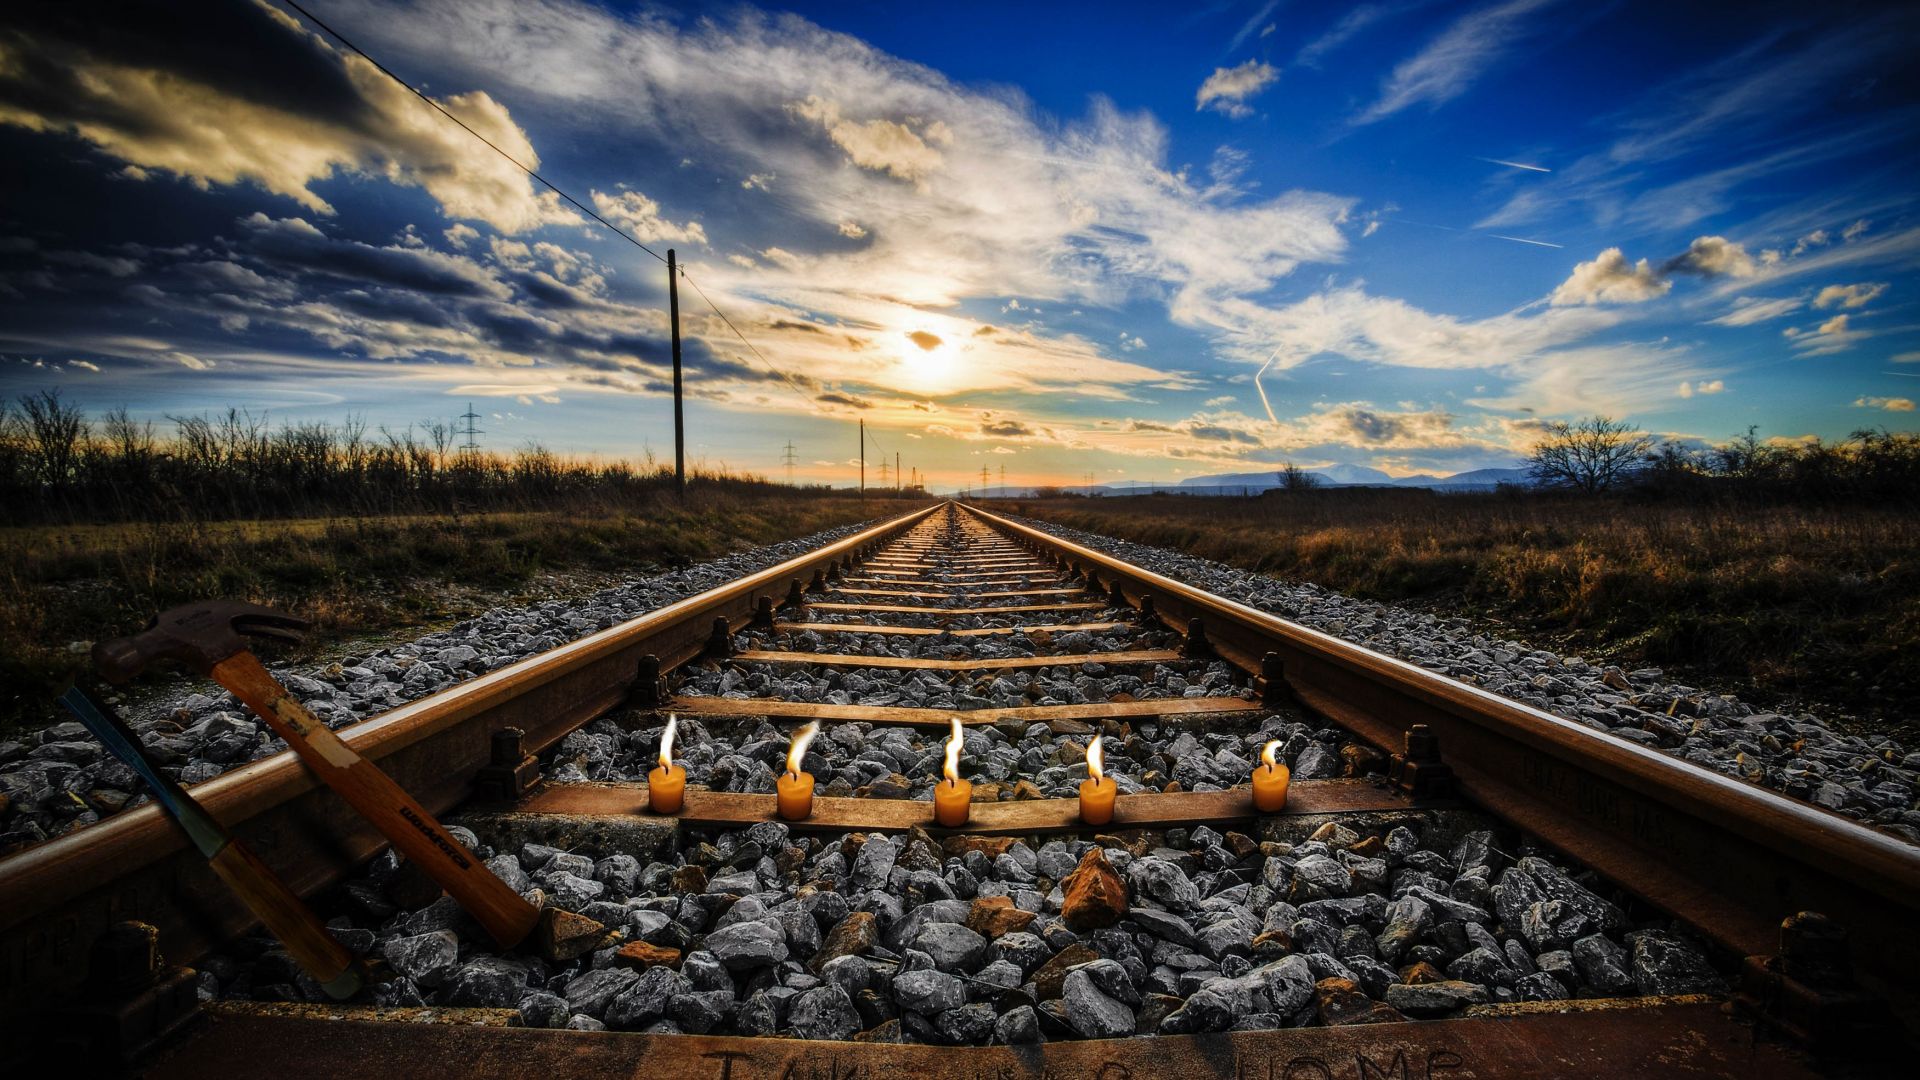 Wallpaper Take me home, railway track, landscape, candles